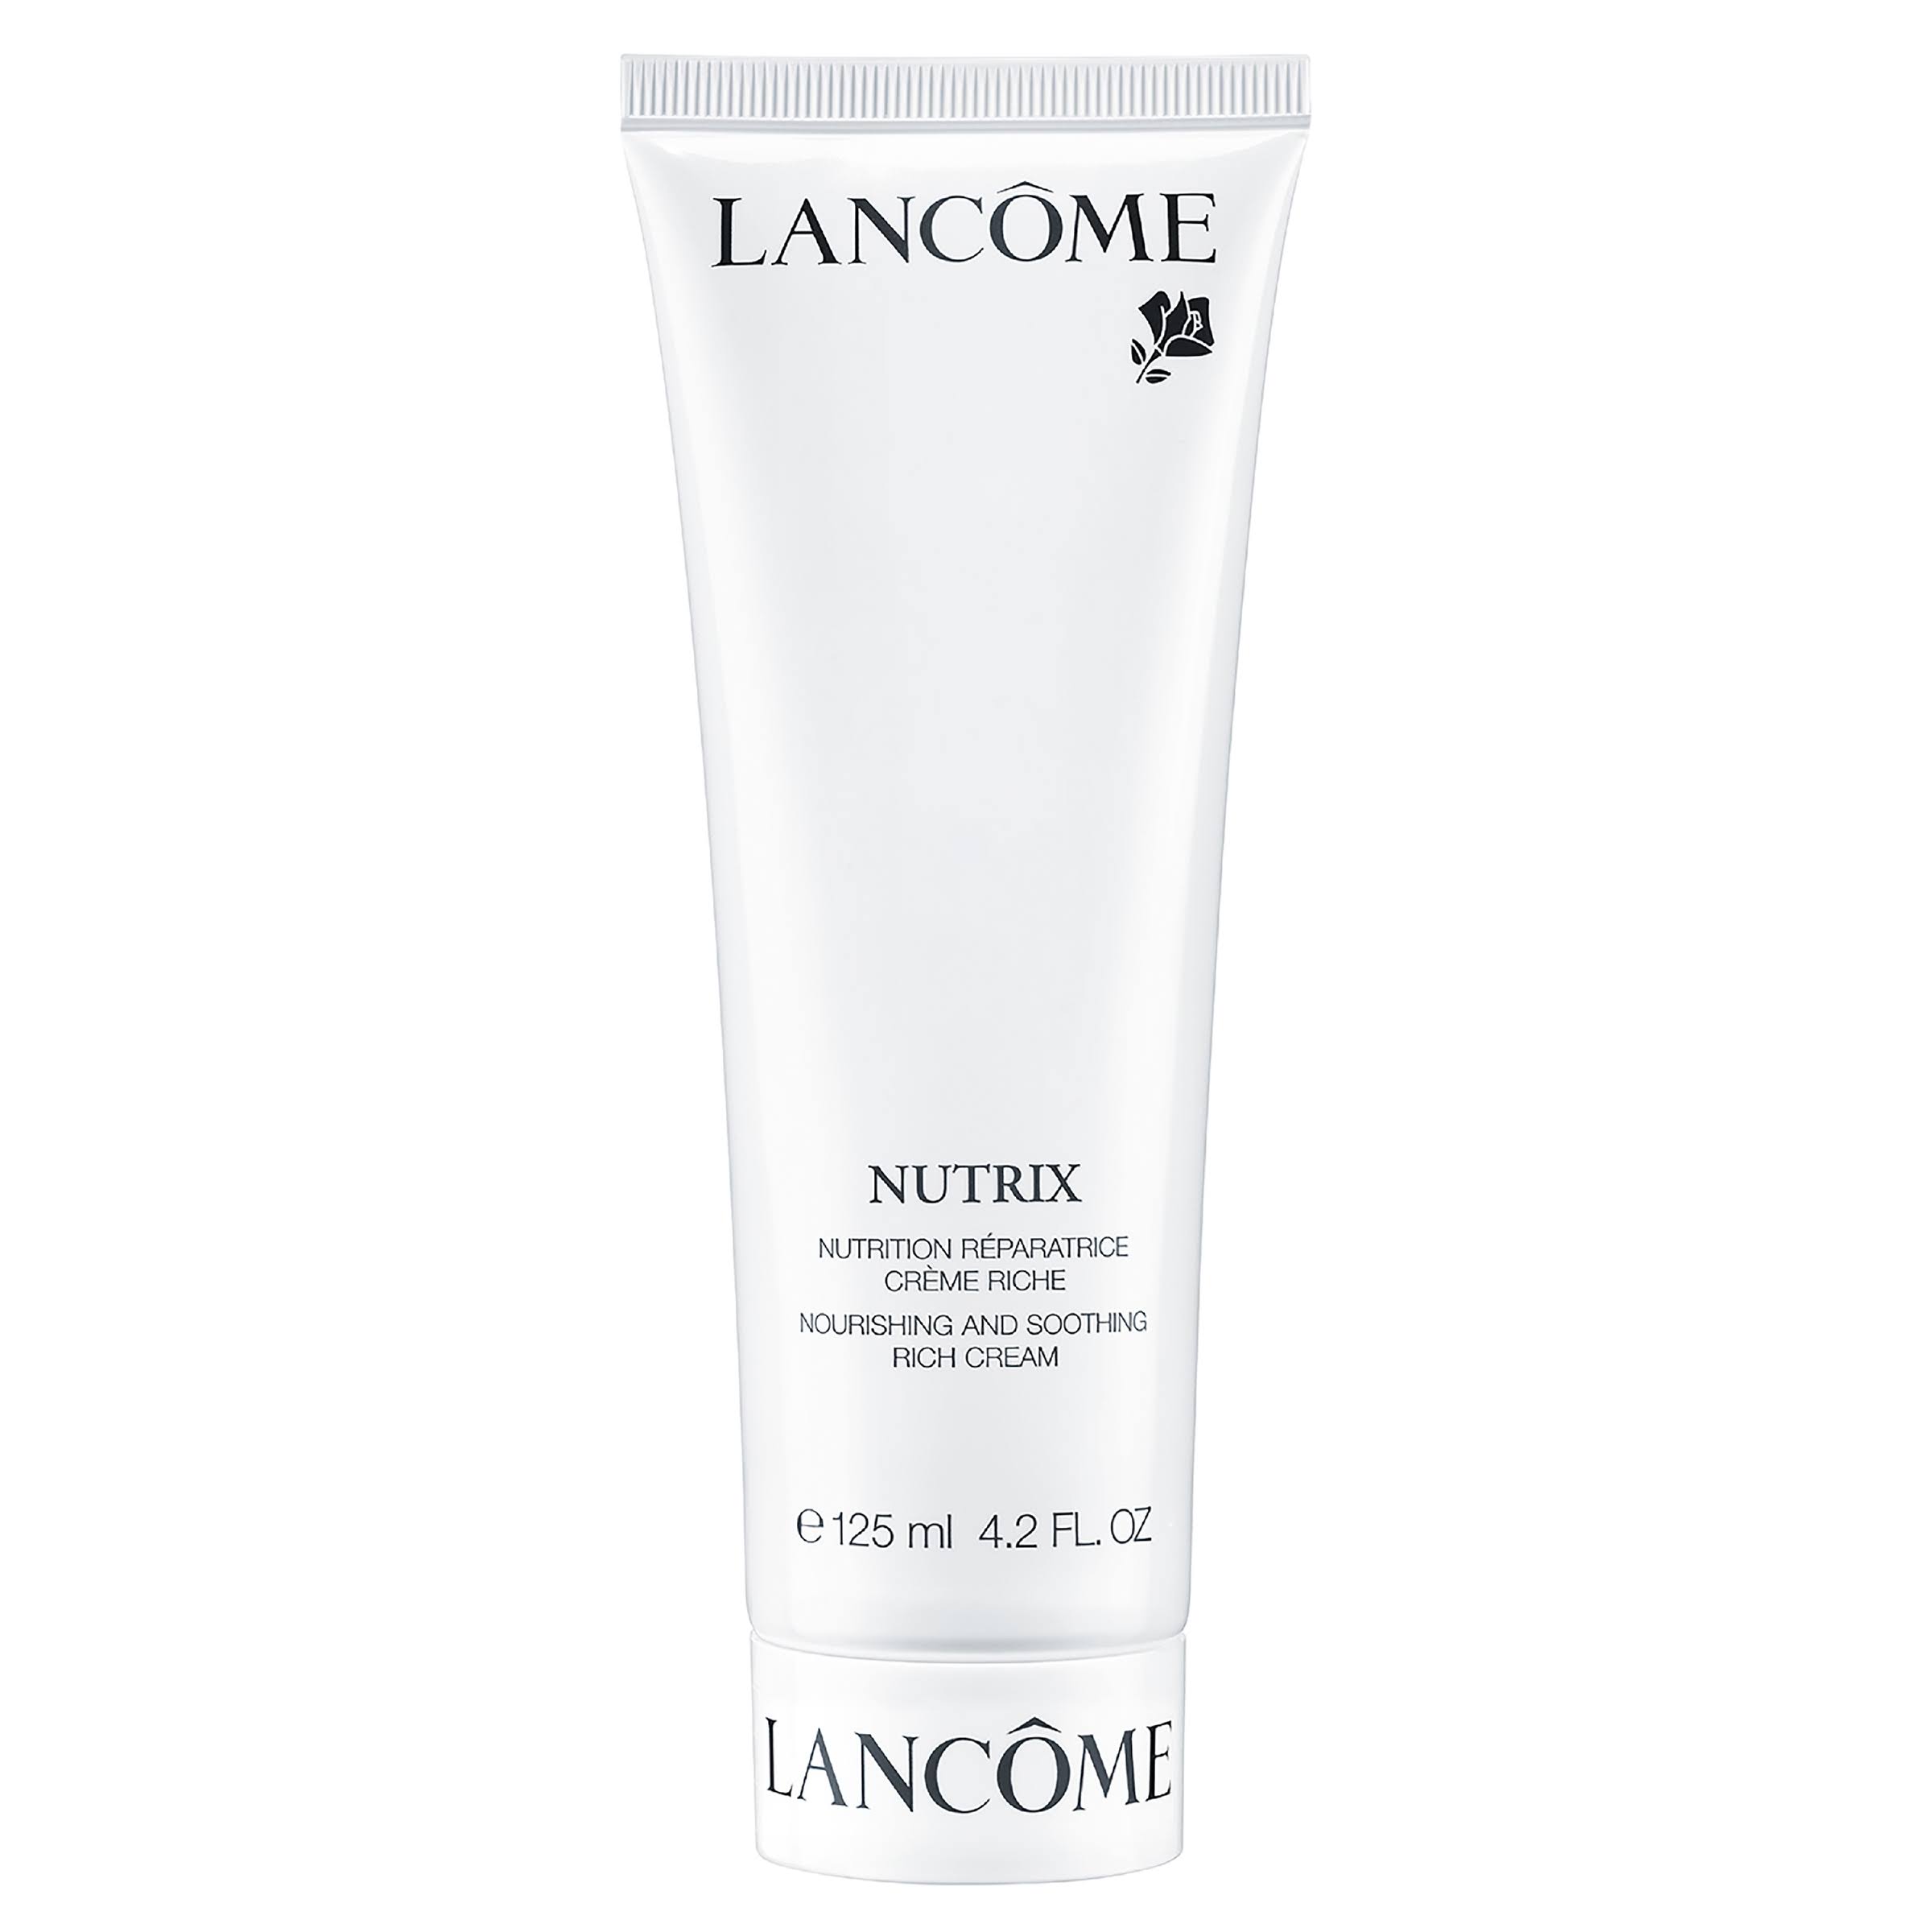 Lancome Nutrix Nourishing and Soothing Rich Cream 125ml